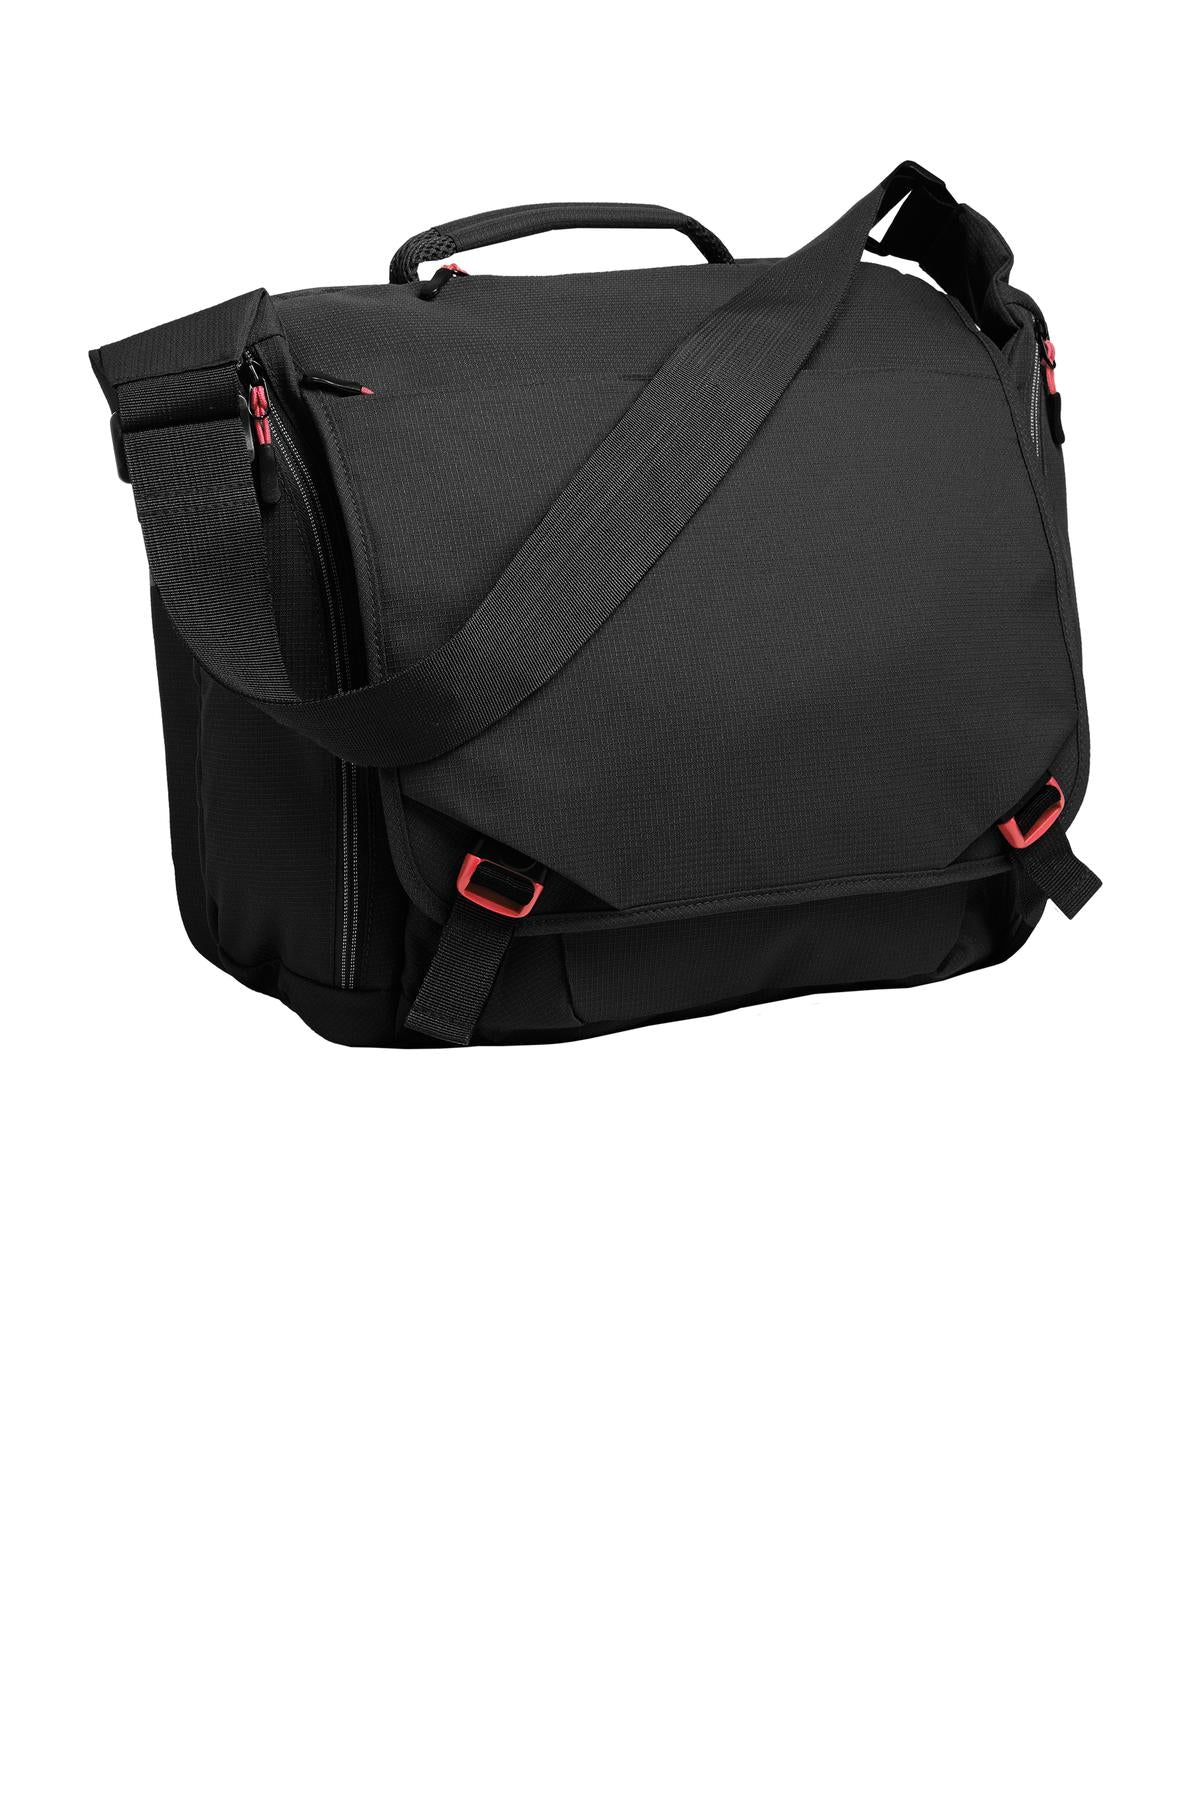 Photo of Port Authority Bags BG300  color  Black/ Red